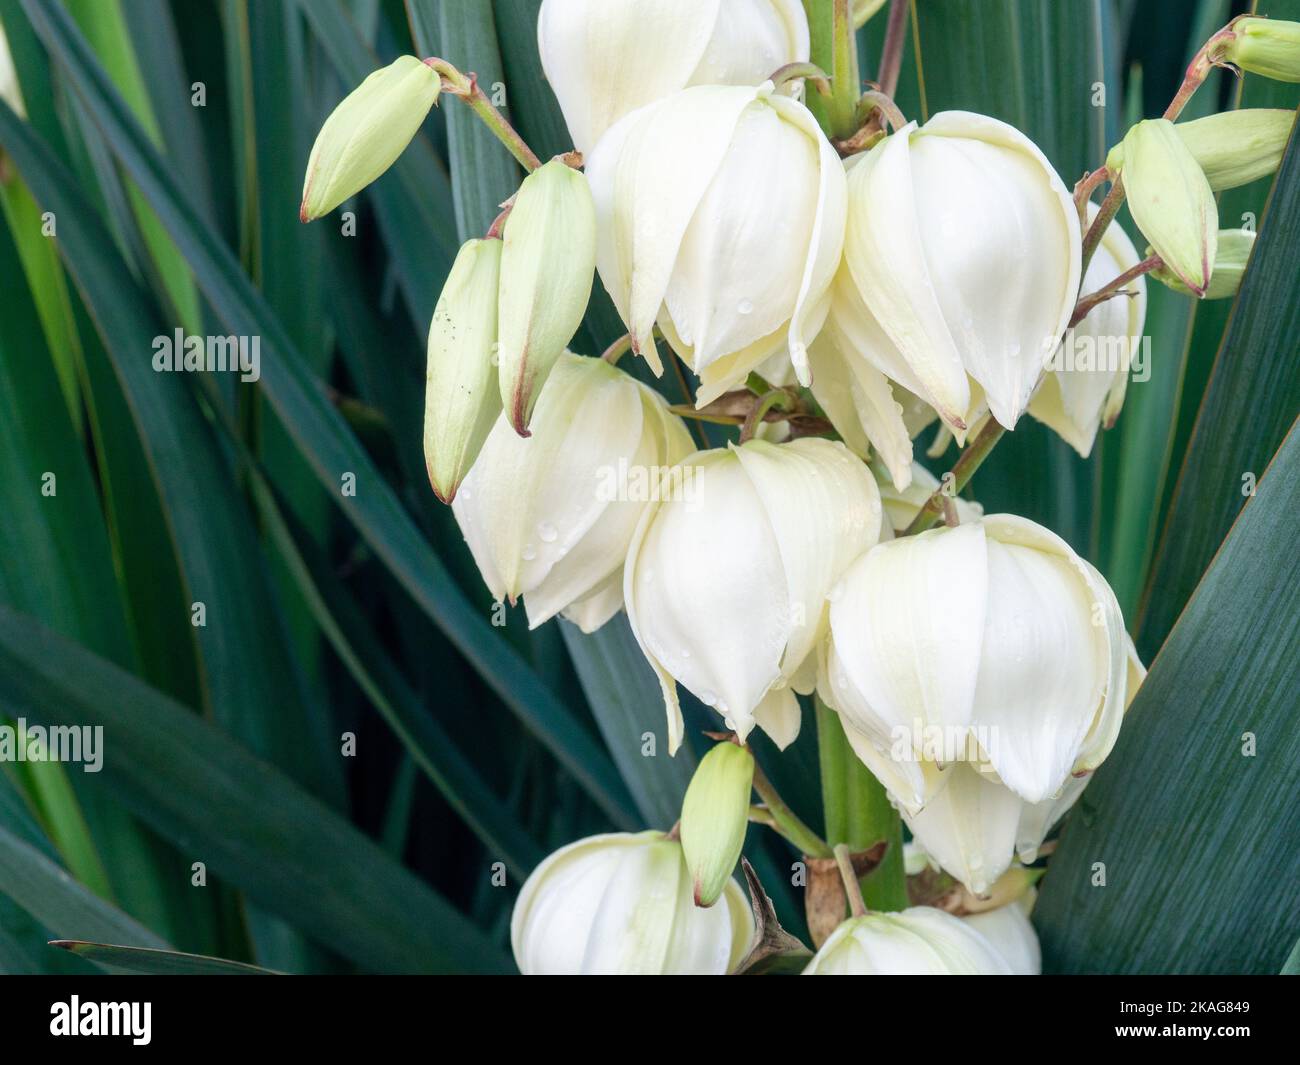 Yucca. The palm tree blooms with white flowers. Botany. Flowers close-up. Stock Photo